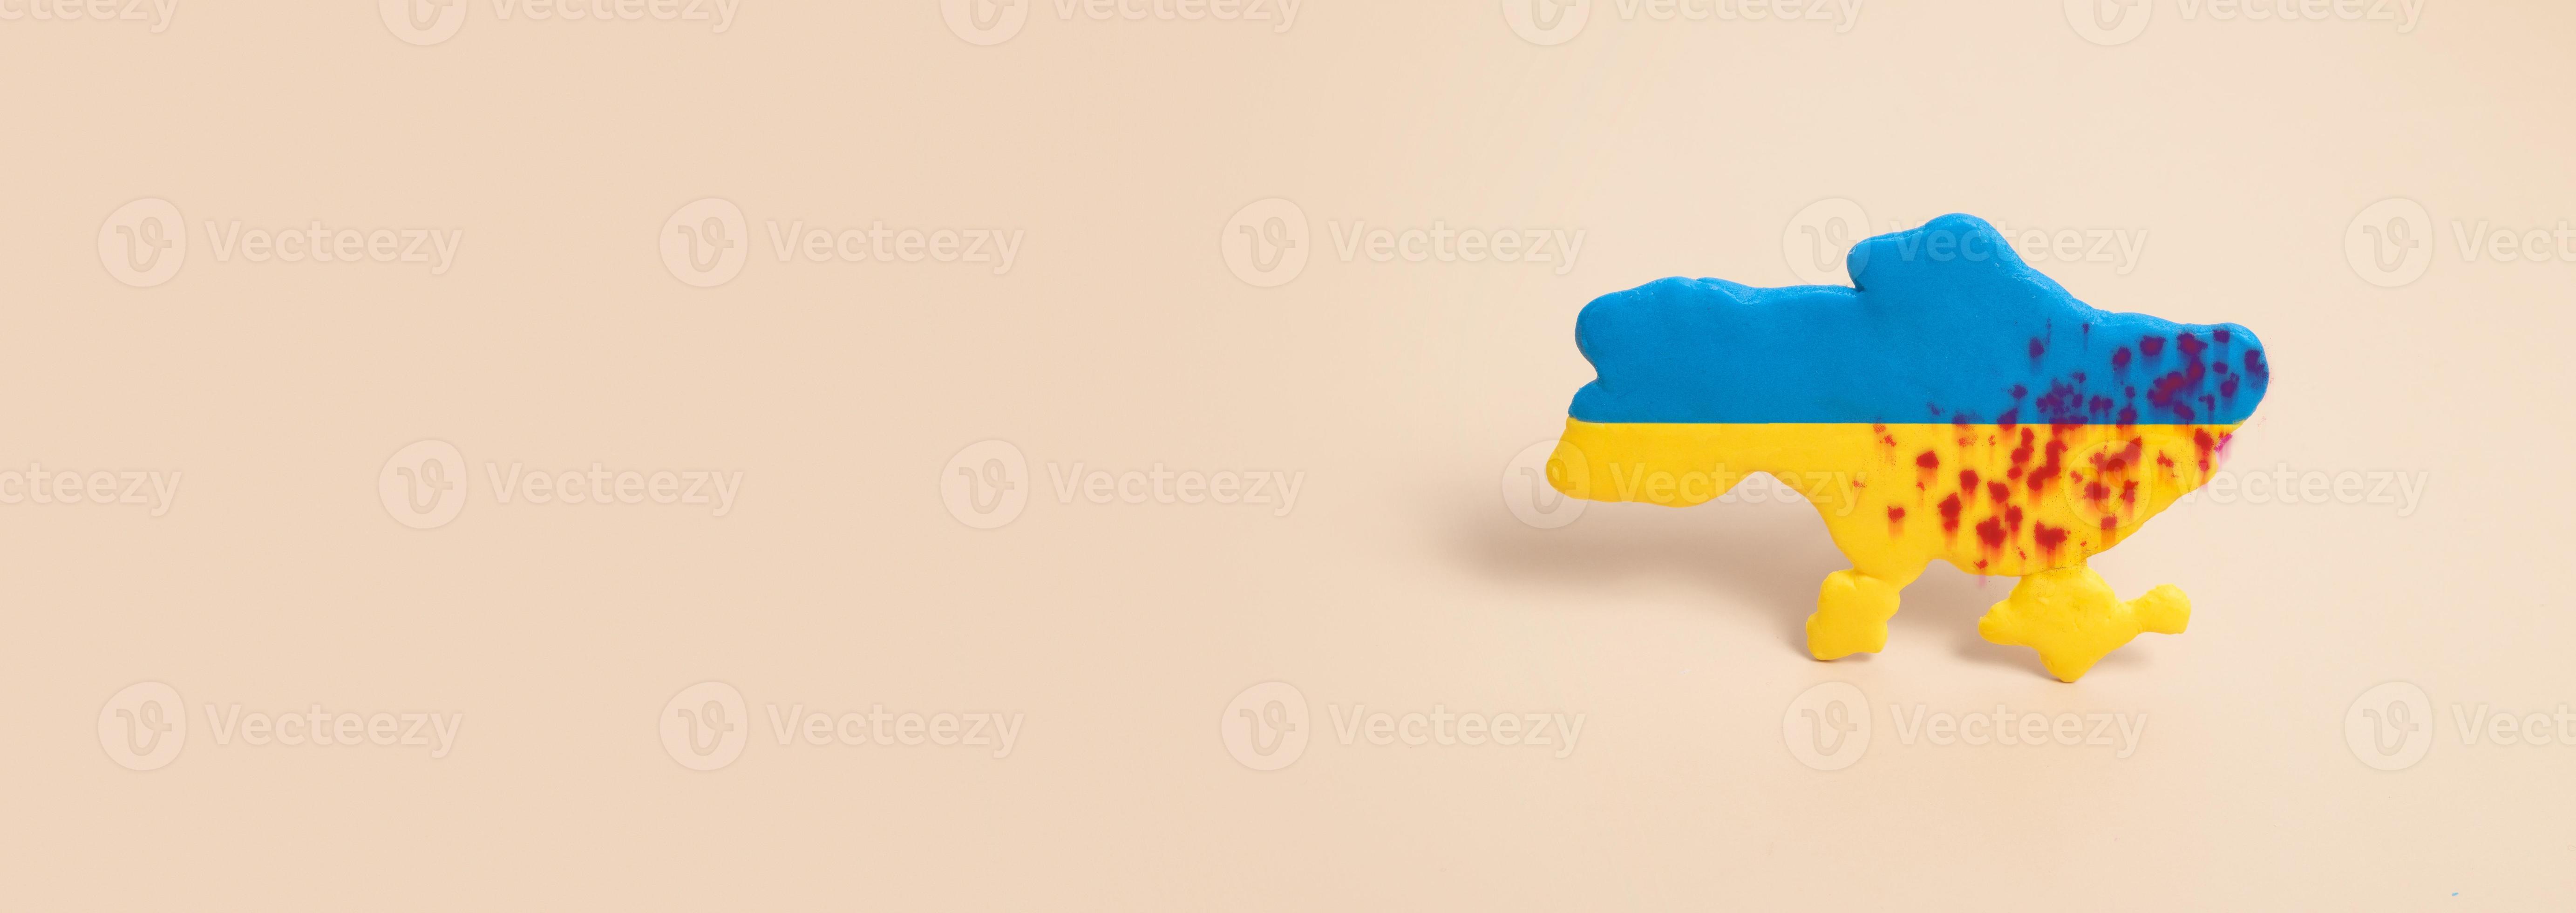 Plasticine yellow and blue map of Ukraine with shots in the blood with copy  space banner format. War in Ukraine concept 7687519 Stock Photo at Vecteezy